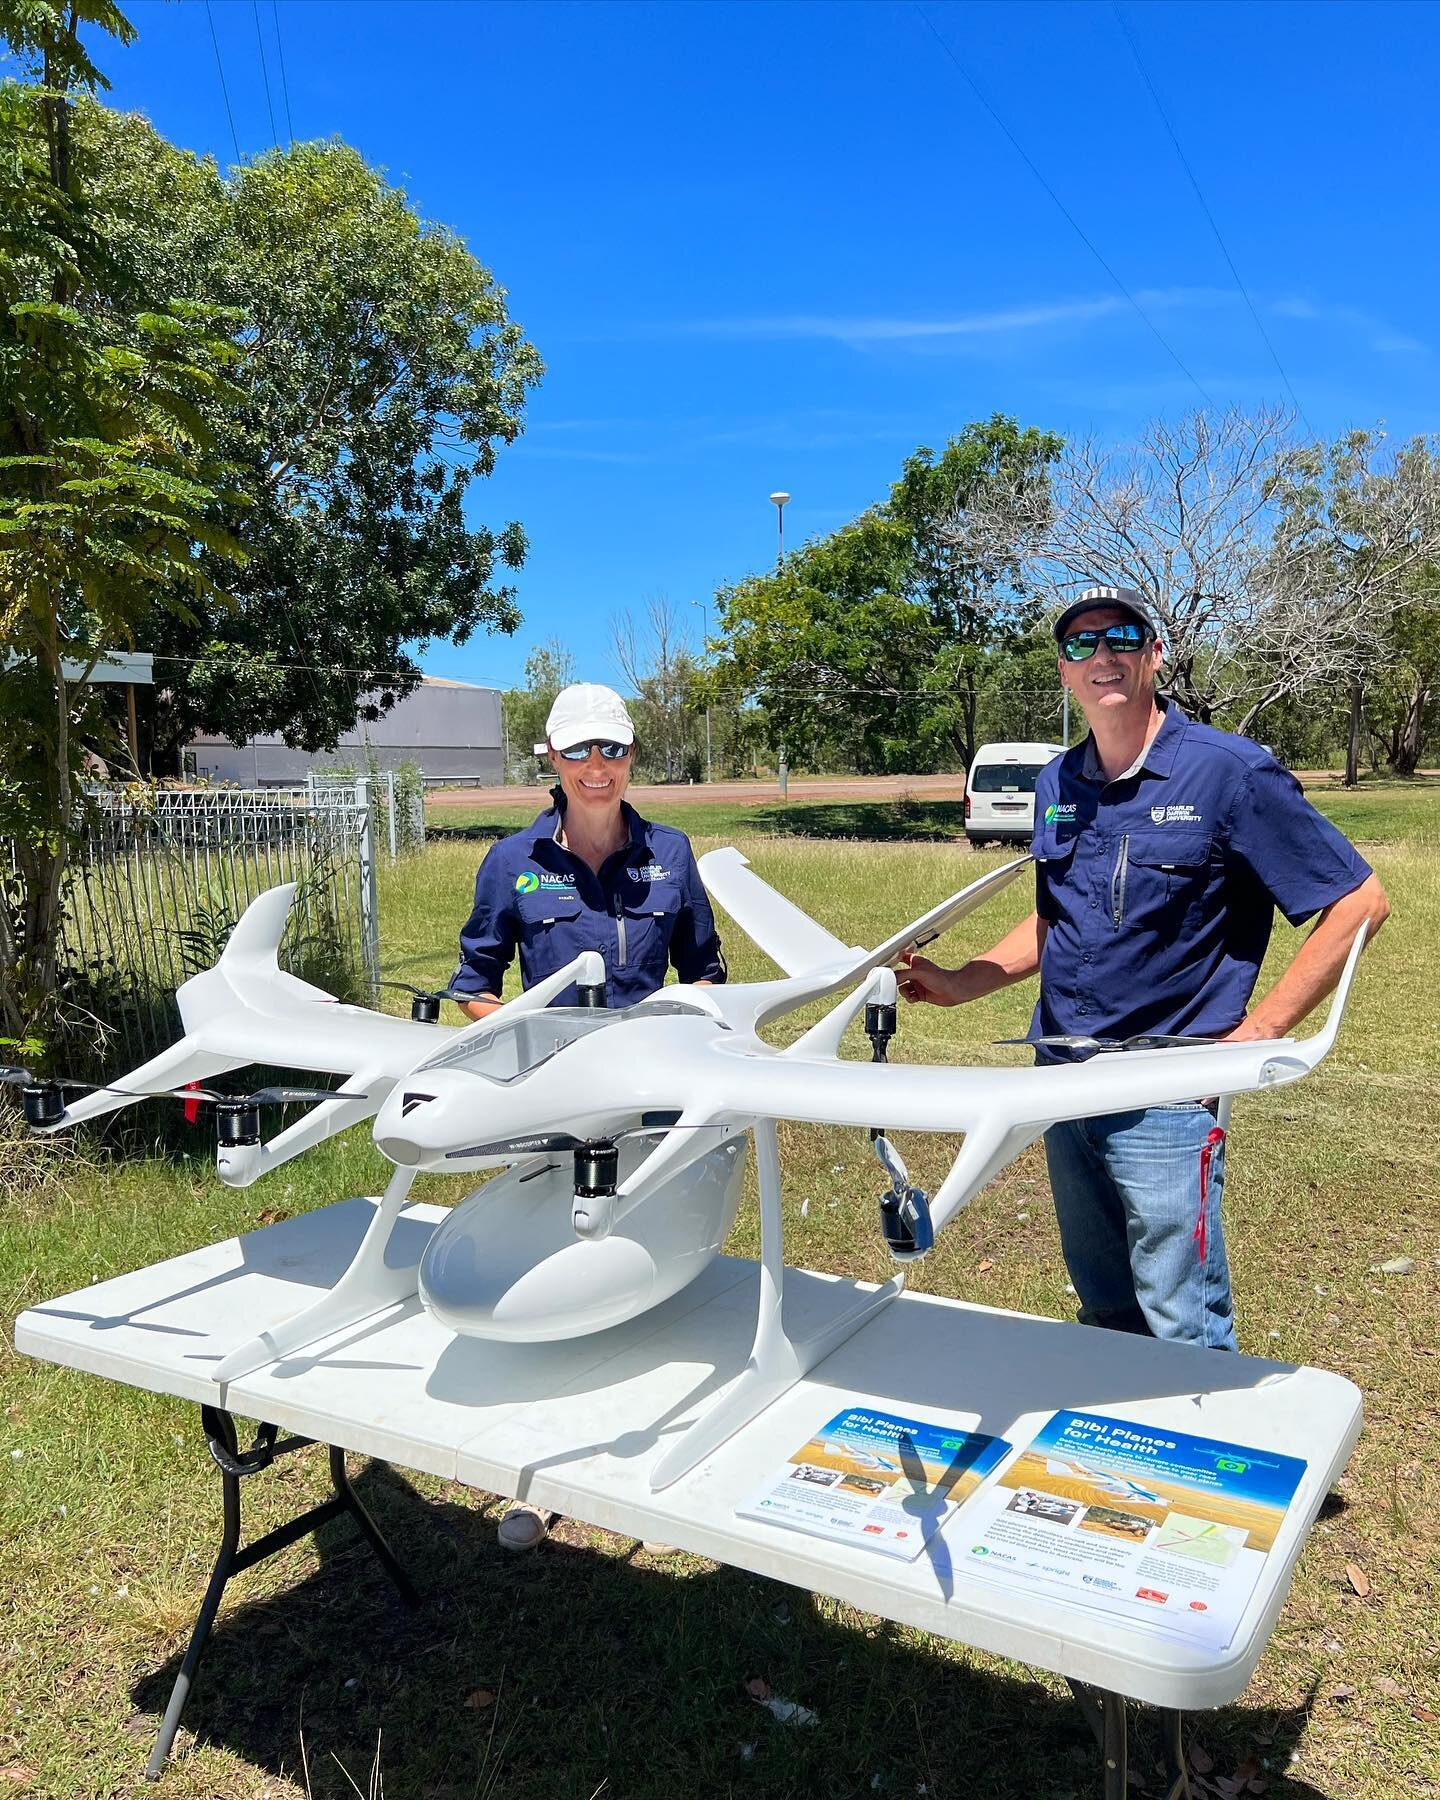 A successful day out at Jabiru showing off the Wingcopter delivery drone to the Red Lily Health Board, key stakeholders and the wider community.

We&rsquo;re so pleased to have enthusiast support from the community for the Drones for Health project.